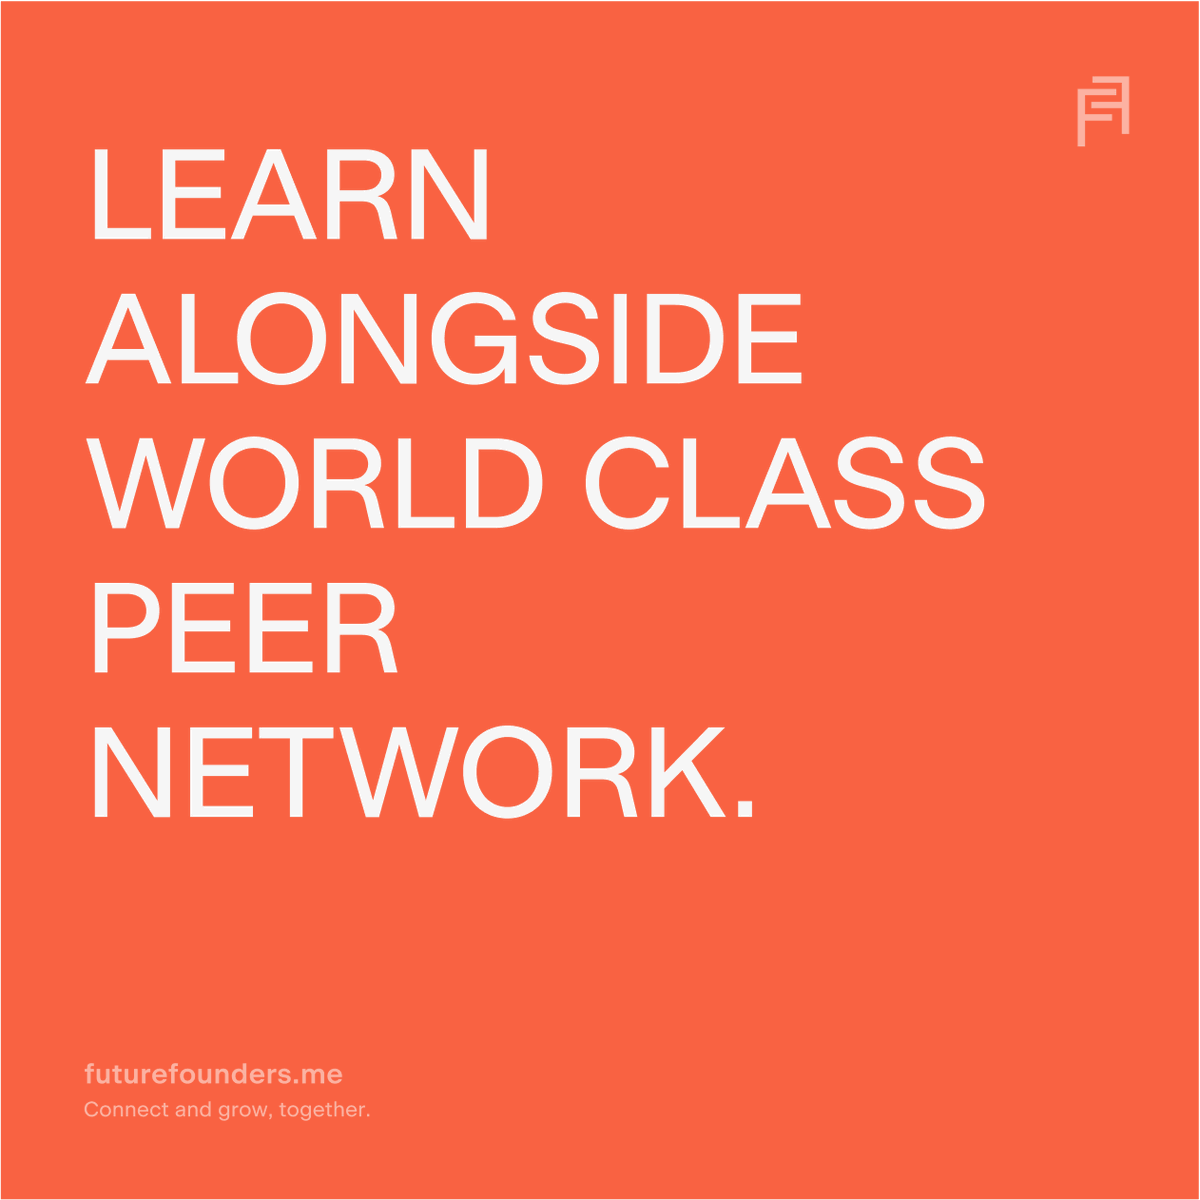 Hello founders, 

Join us in the pursuit of knowledge and growth! Learn alongside a world-class peer network and unlock your full potential. Let's elevate each other to new heights! #education 

#futurefounders